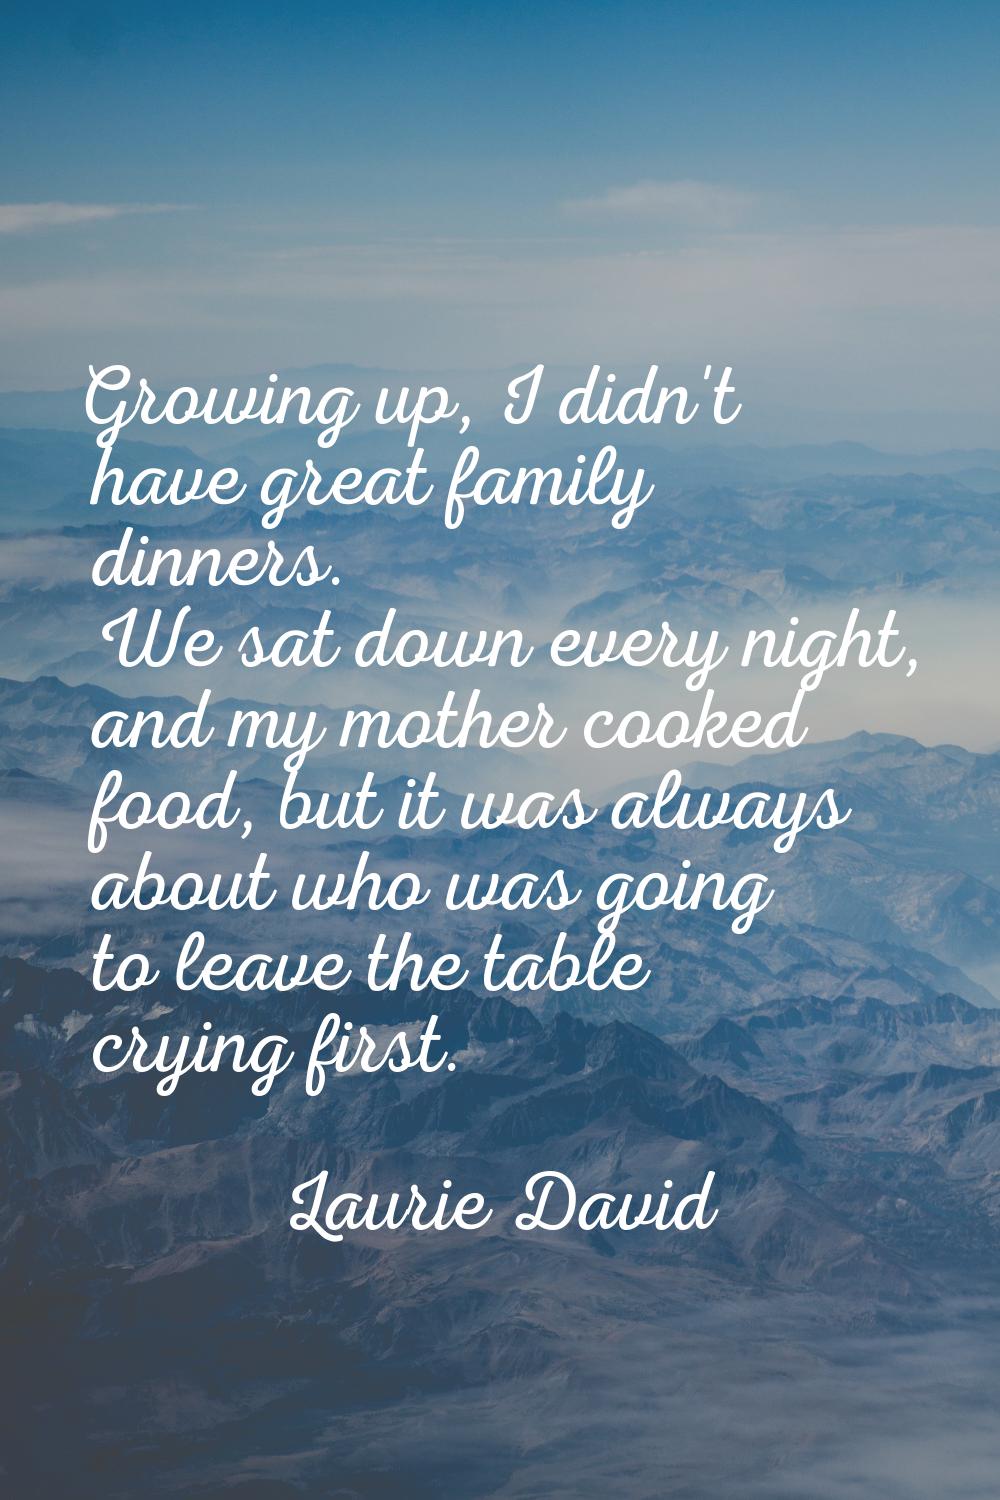 Growing up, I didn't have great family dinners. We sat down every night, and my mother cooked food,